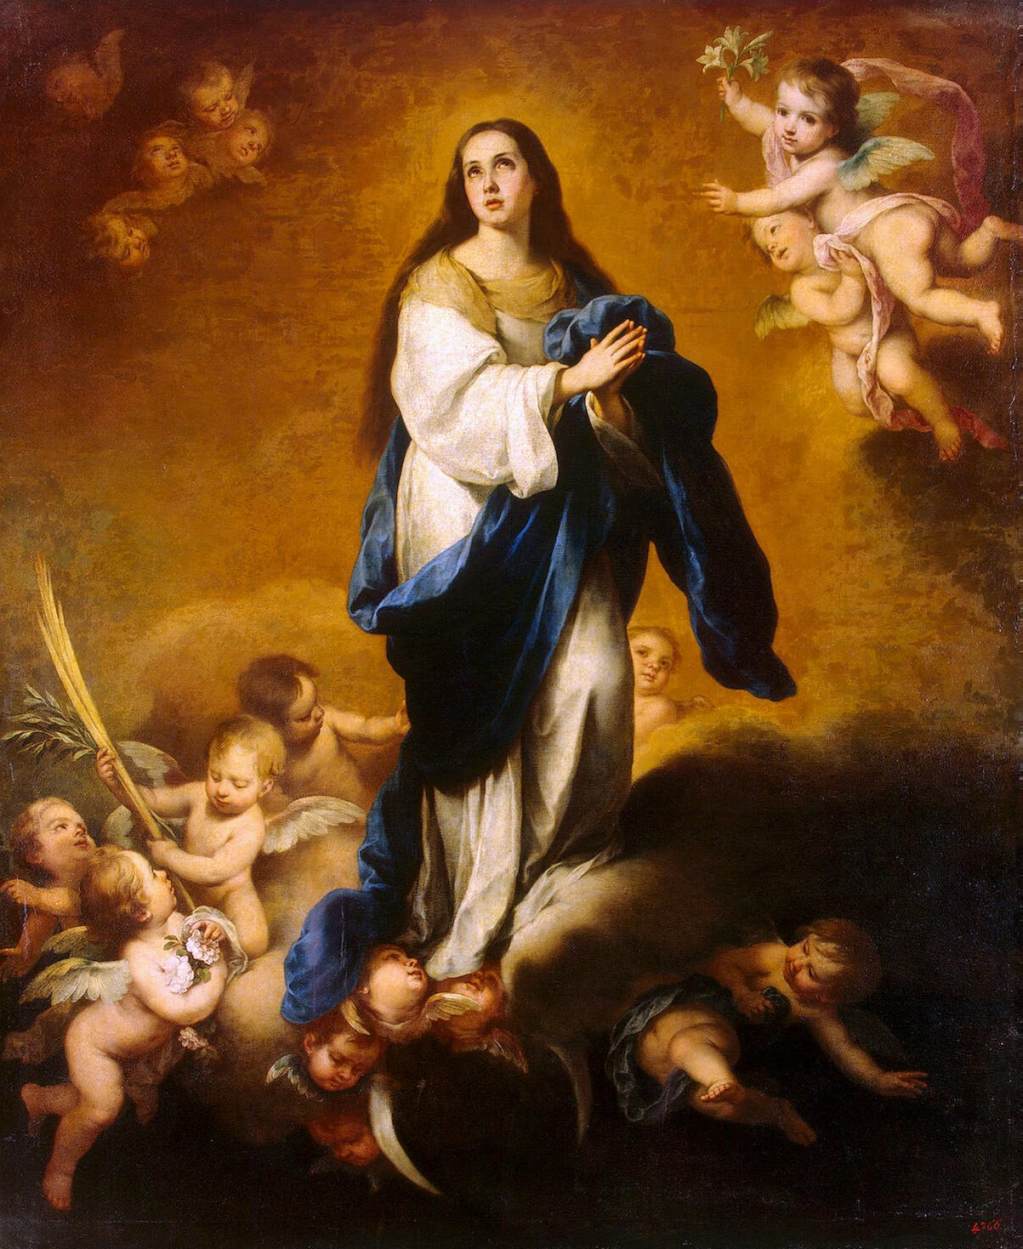 The Immaculate Conception of Esquilache